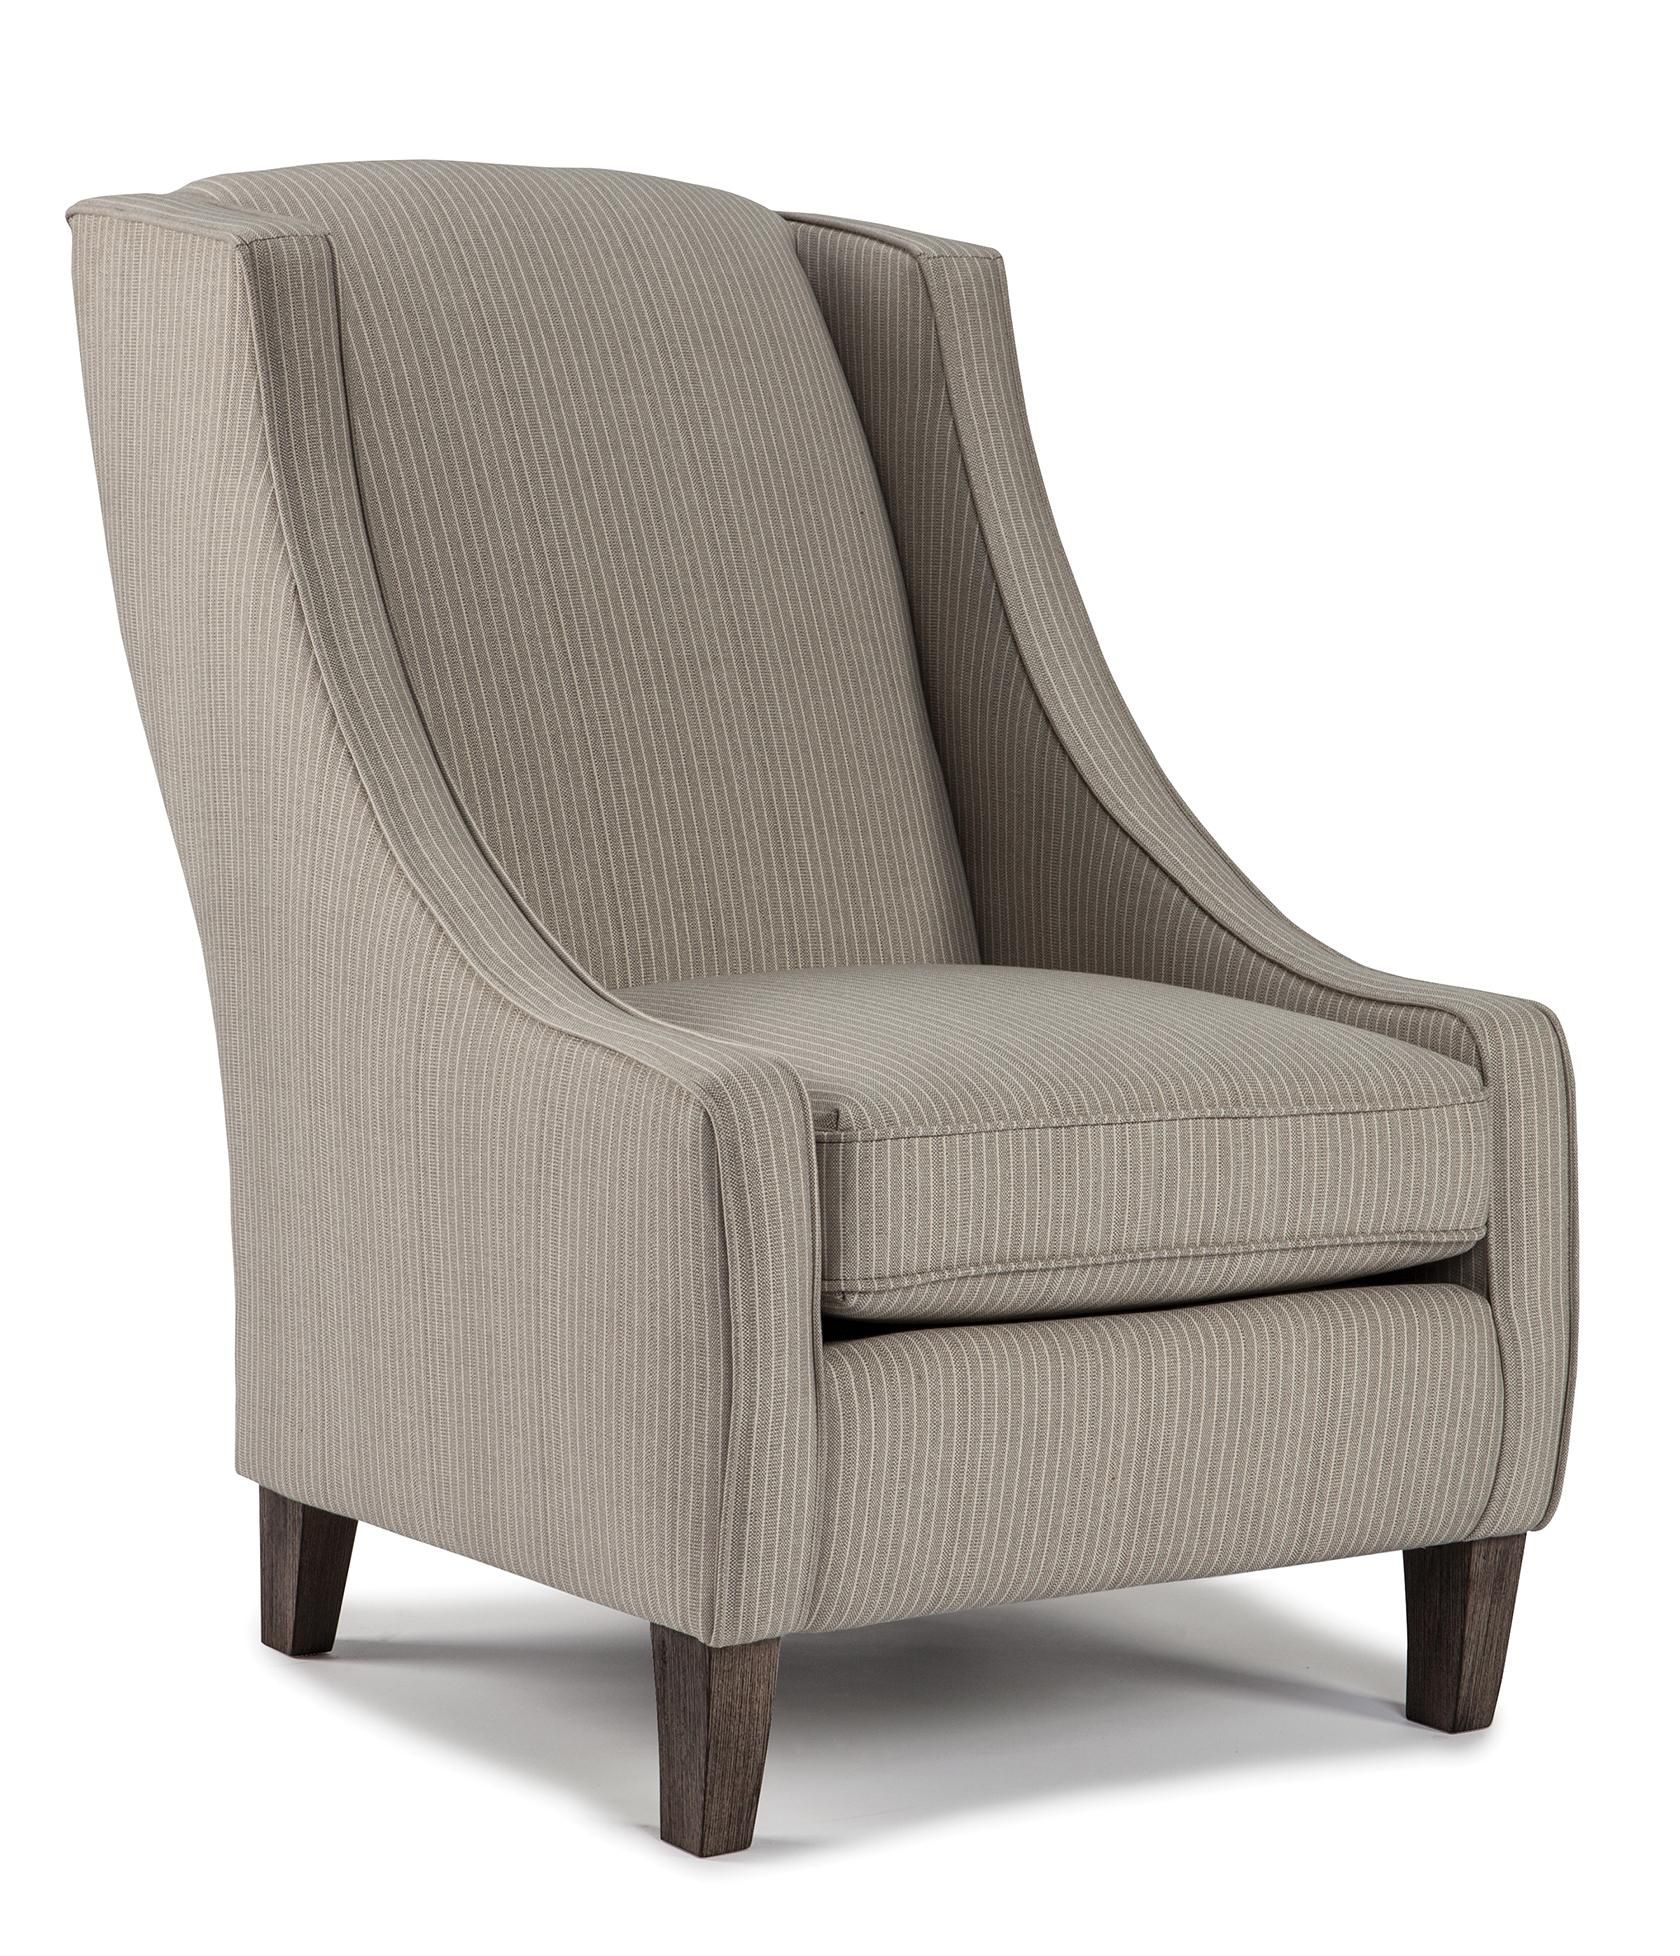 Club Chairs Janice Club Chair Pertaining To Sweetwater Wingback Chairs (View 7 of 15)